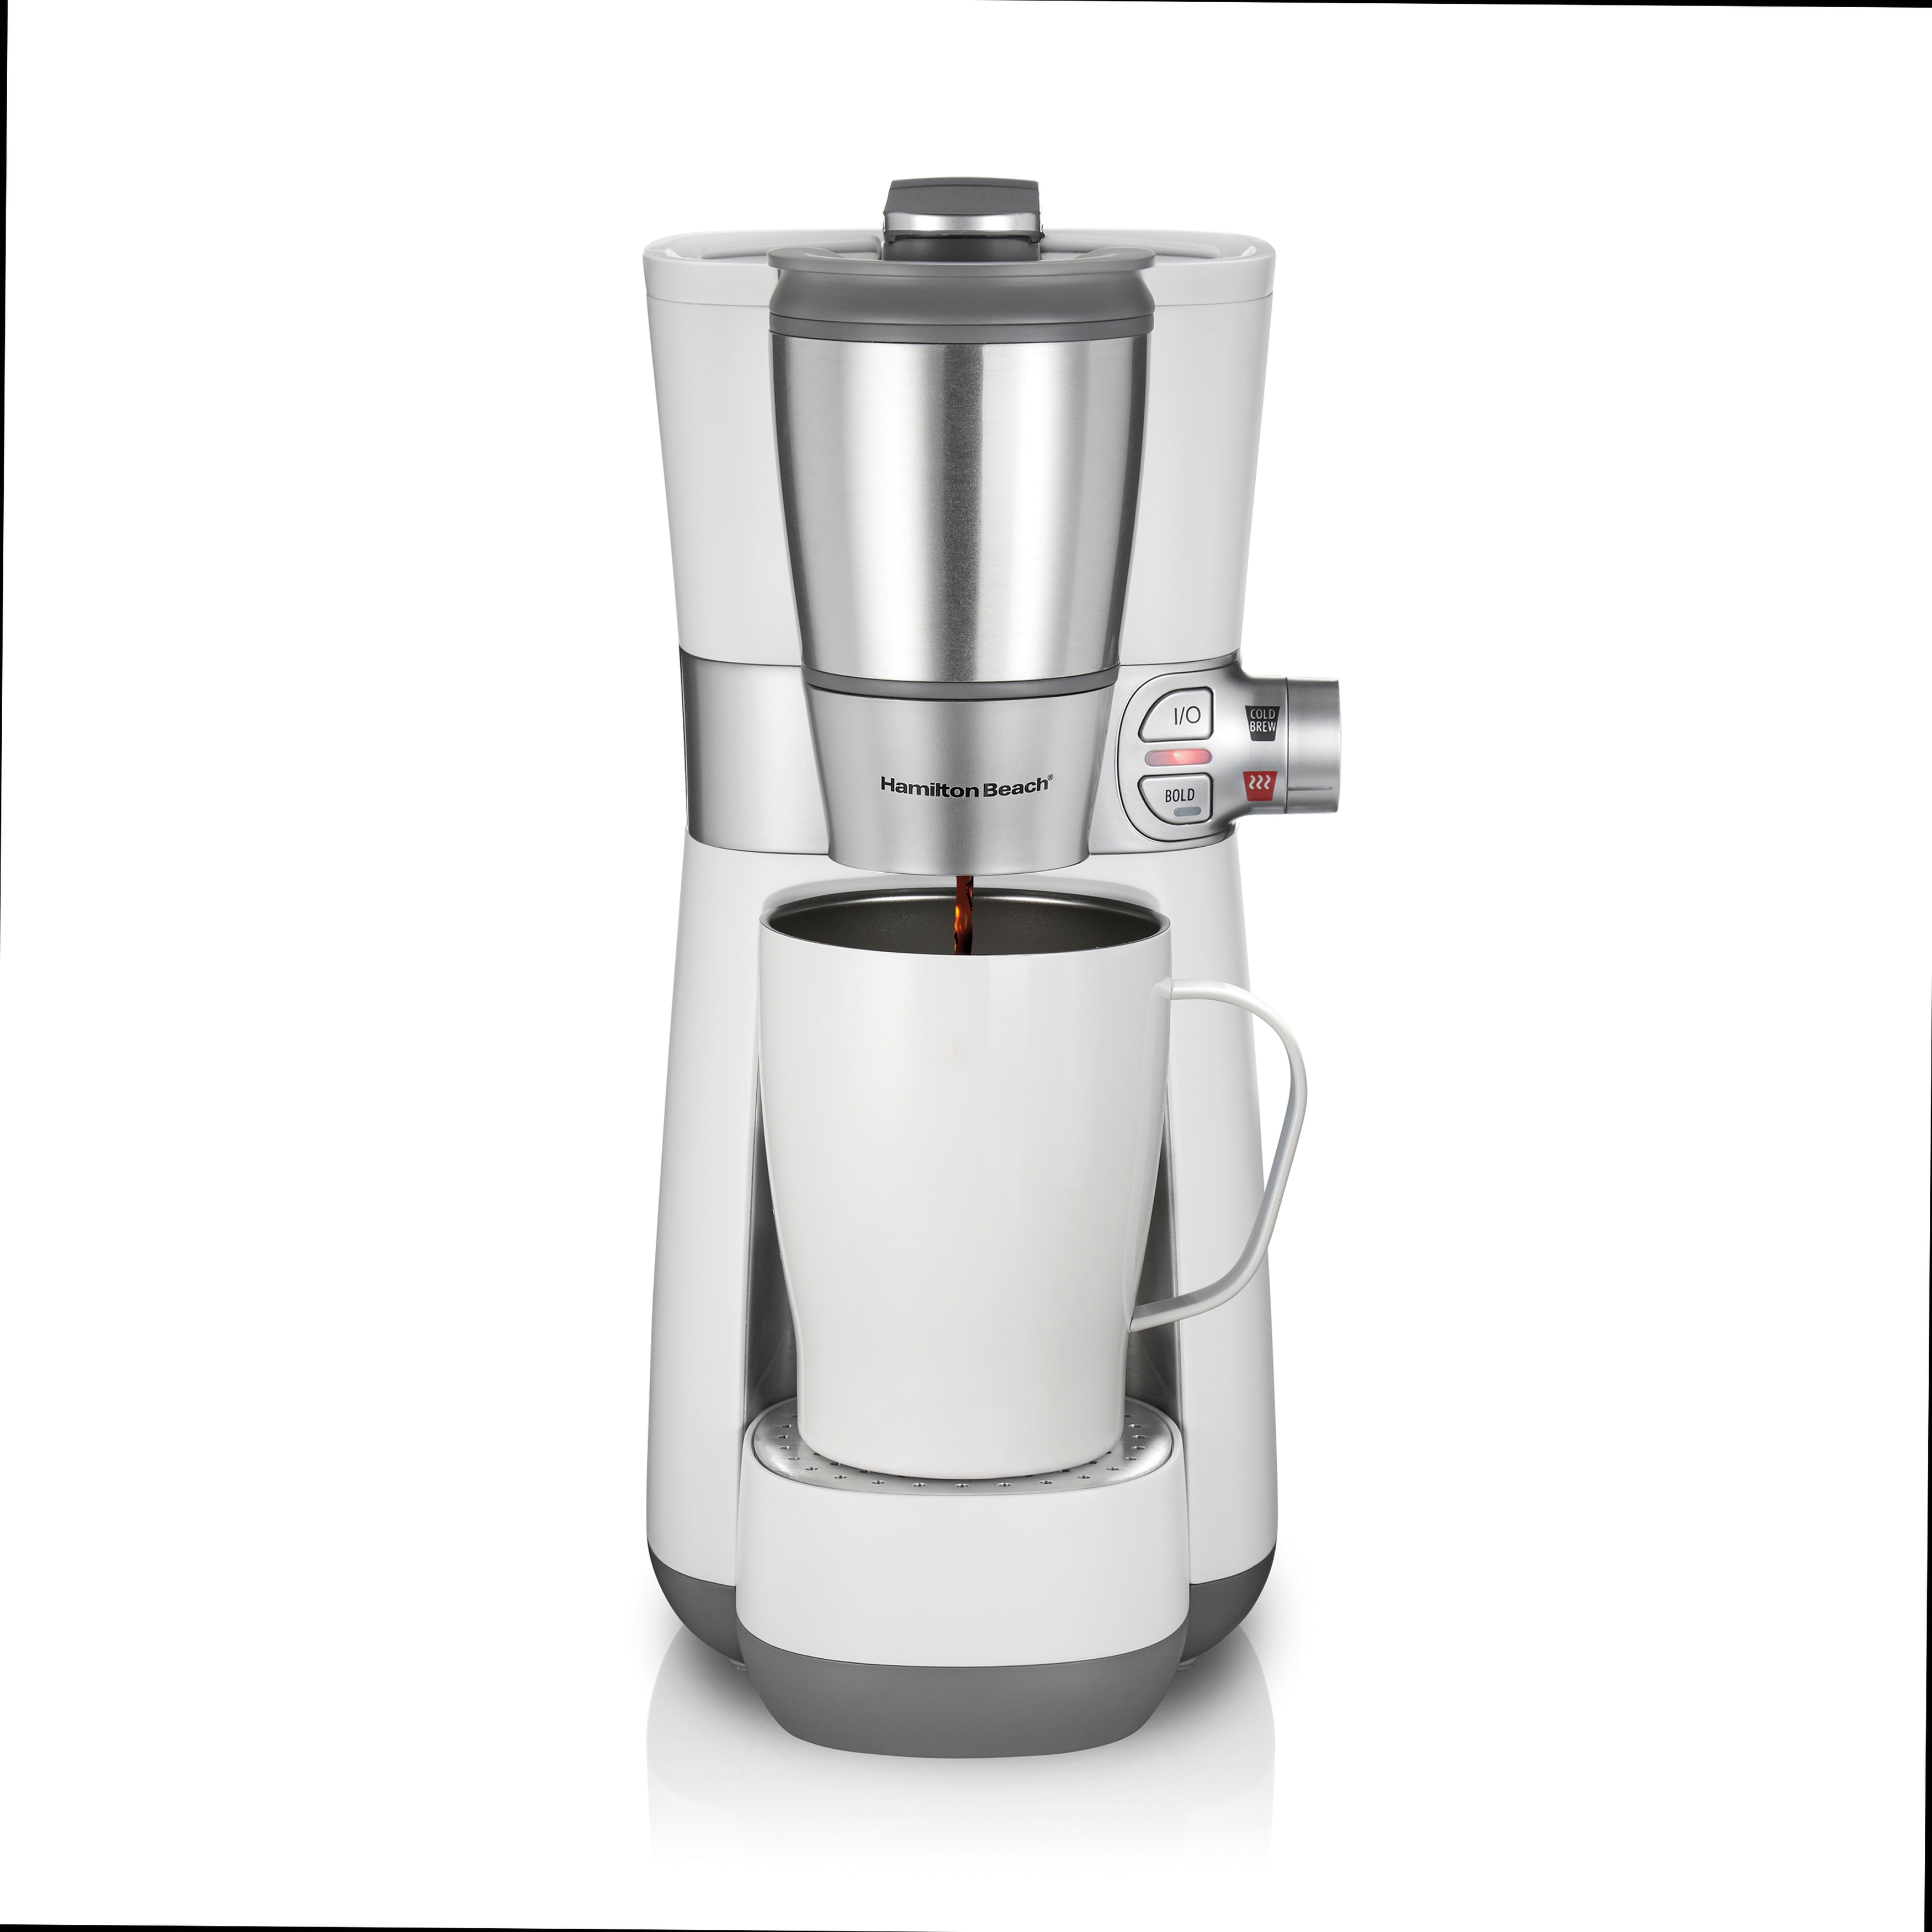 https://ak1.ostkcdn.com/images/products/is/images/direct/cab5e00c5fe0f6d4517179249838fd81c09e32b7/Convenient-Craft-Rapid-Cold-Brew-and-Hot-Coffee-Maker.jpg